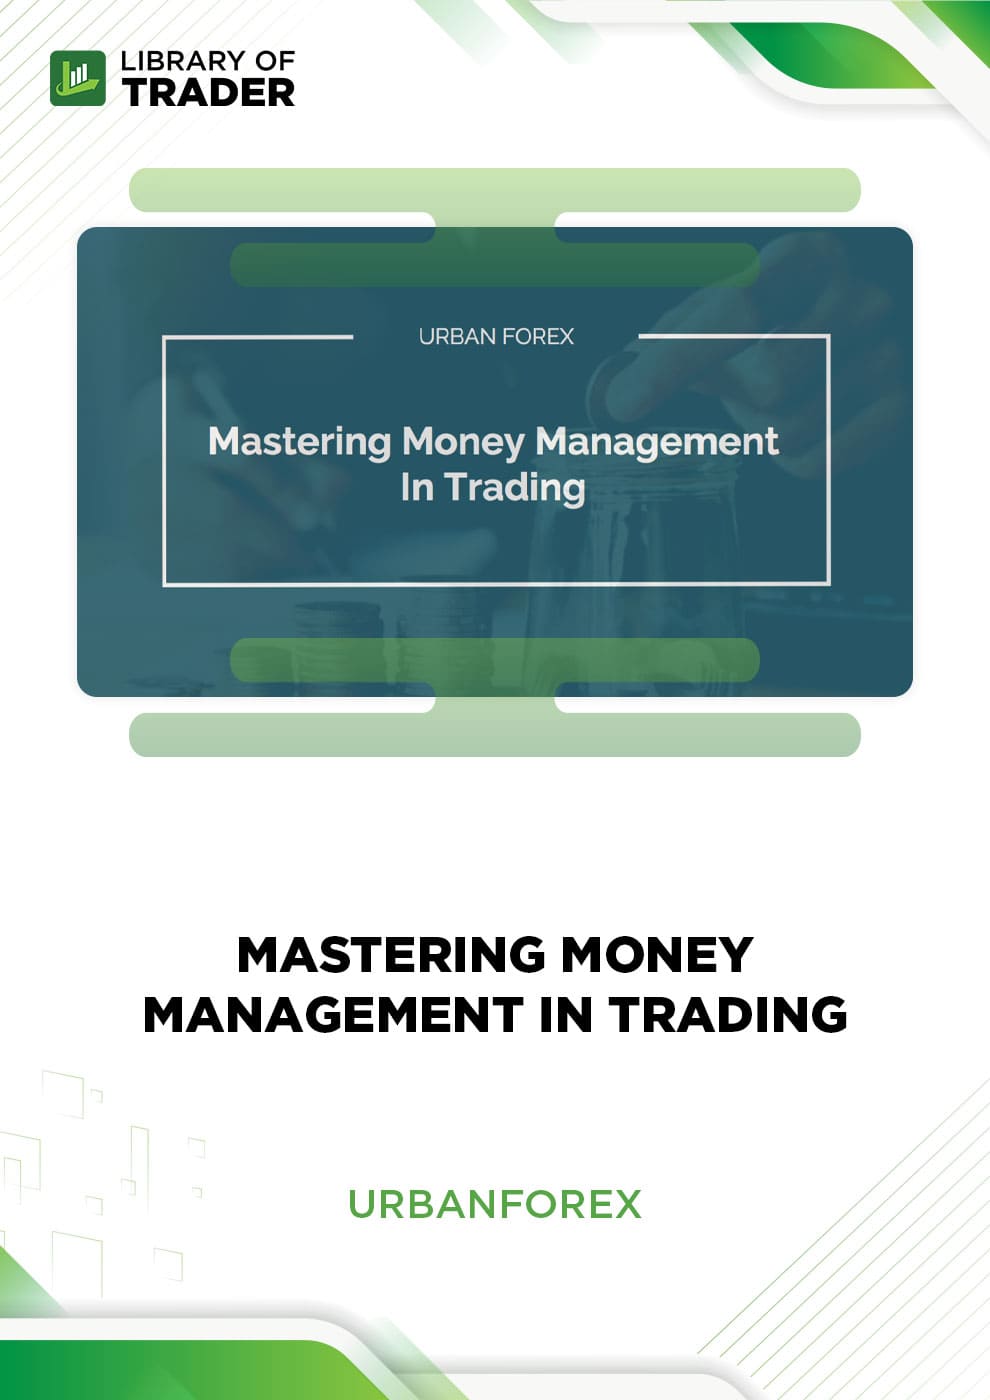 Mastering Money Management in Trading by Urban Forex